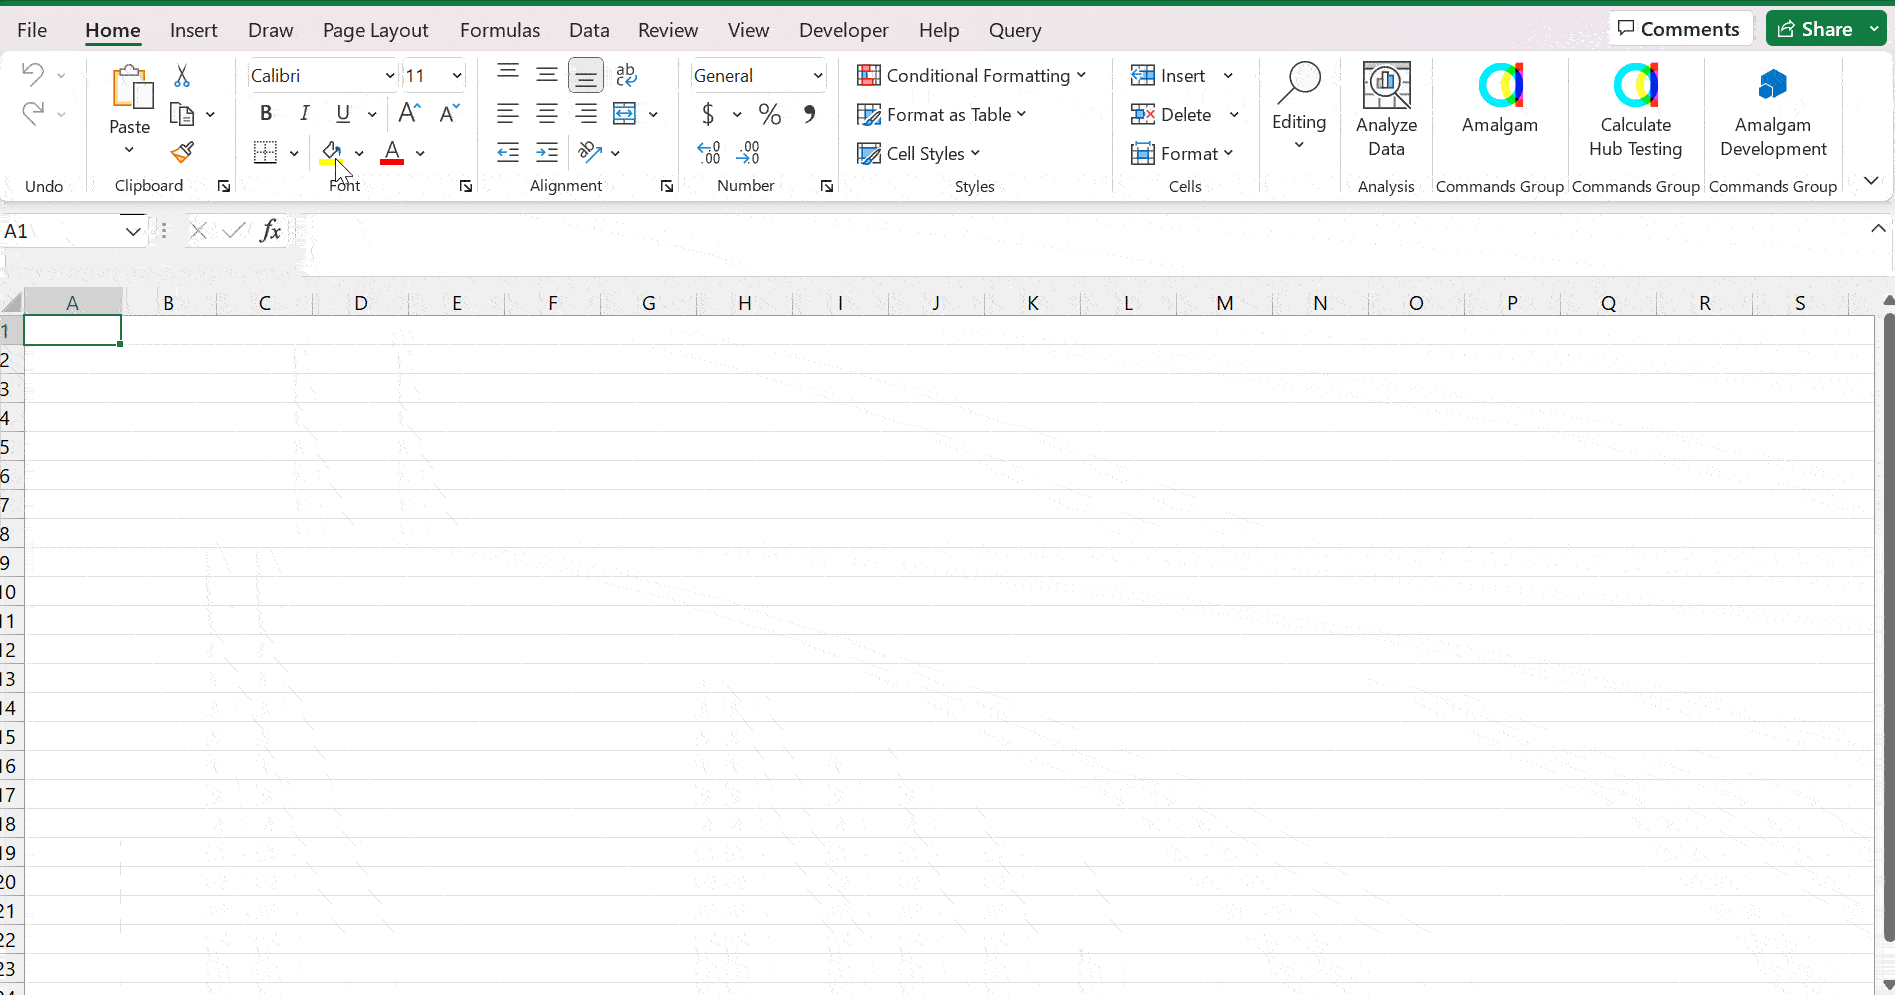 Adding the plugin to Excel